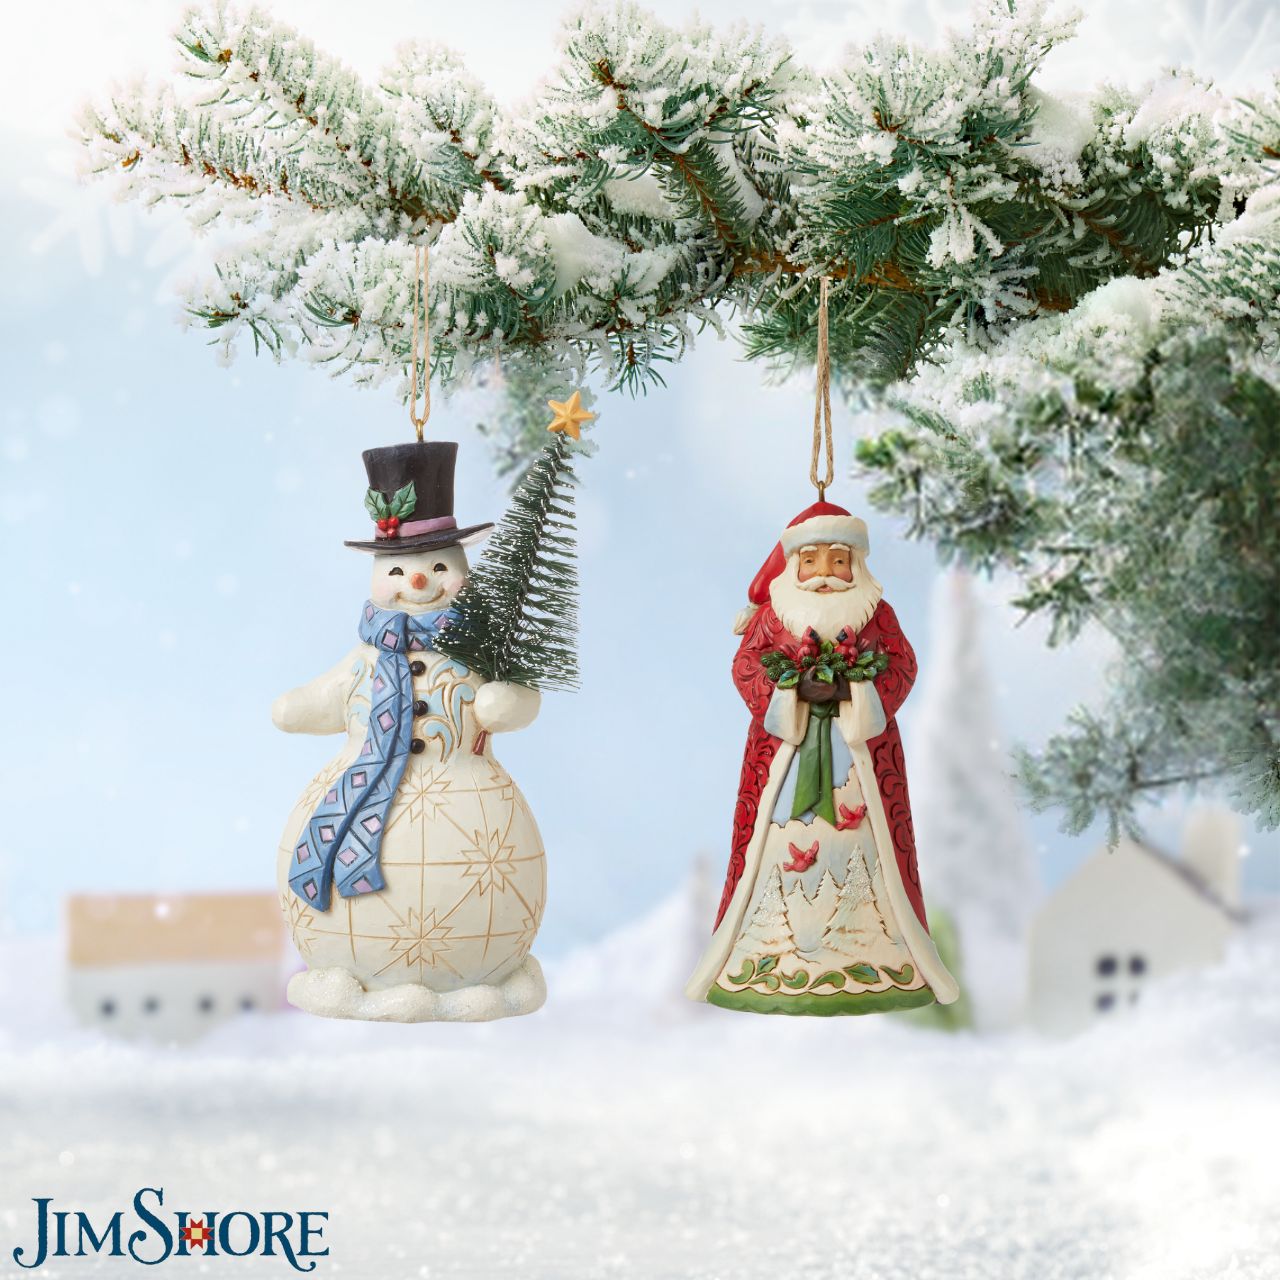 Snowman with Tree Christmas Hanging Ornament  Celebrate Christmas with this beautiful hand crafted and hand painted Snowman with Tree Hanging Ornament. Decorate your Christmas Tree with this intricate hanging ornament.